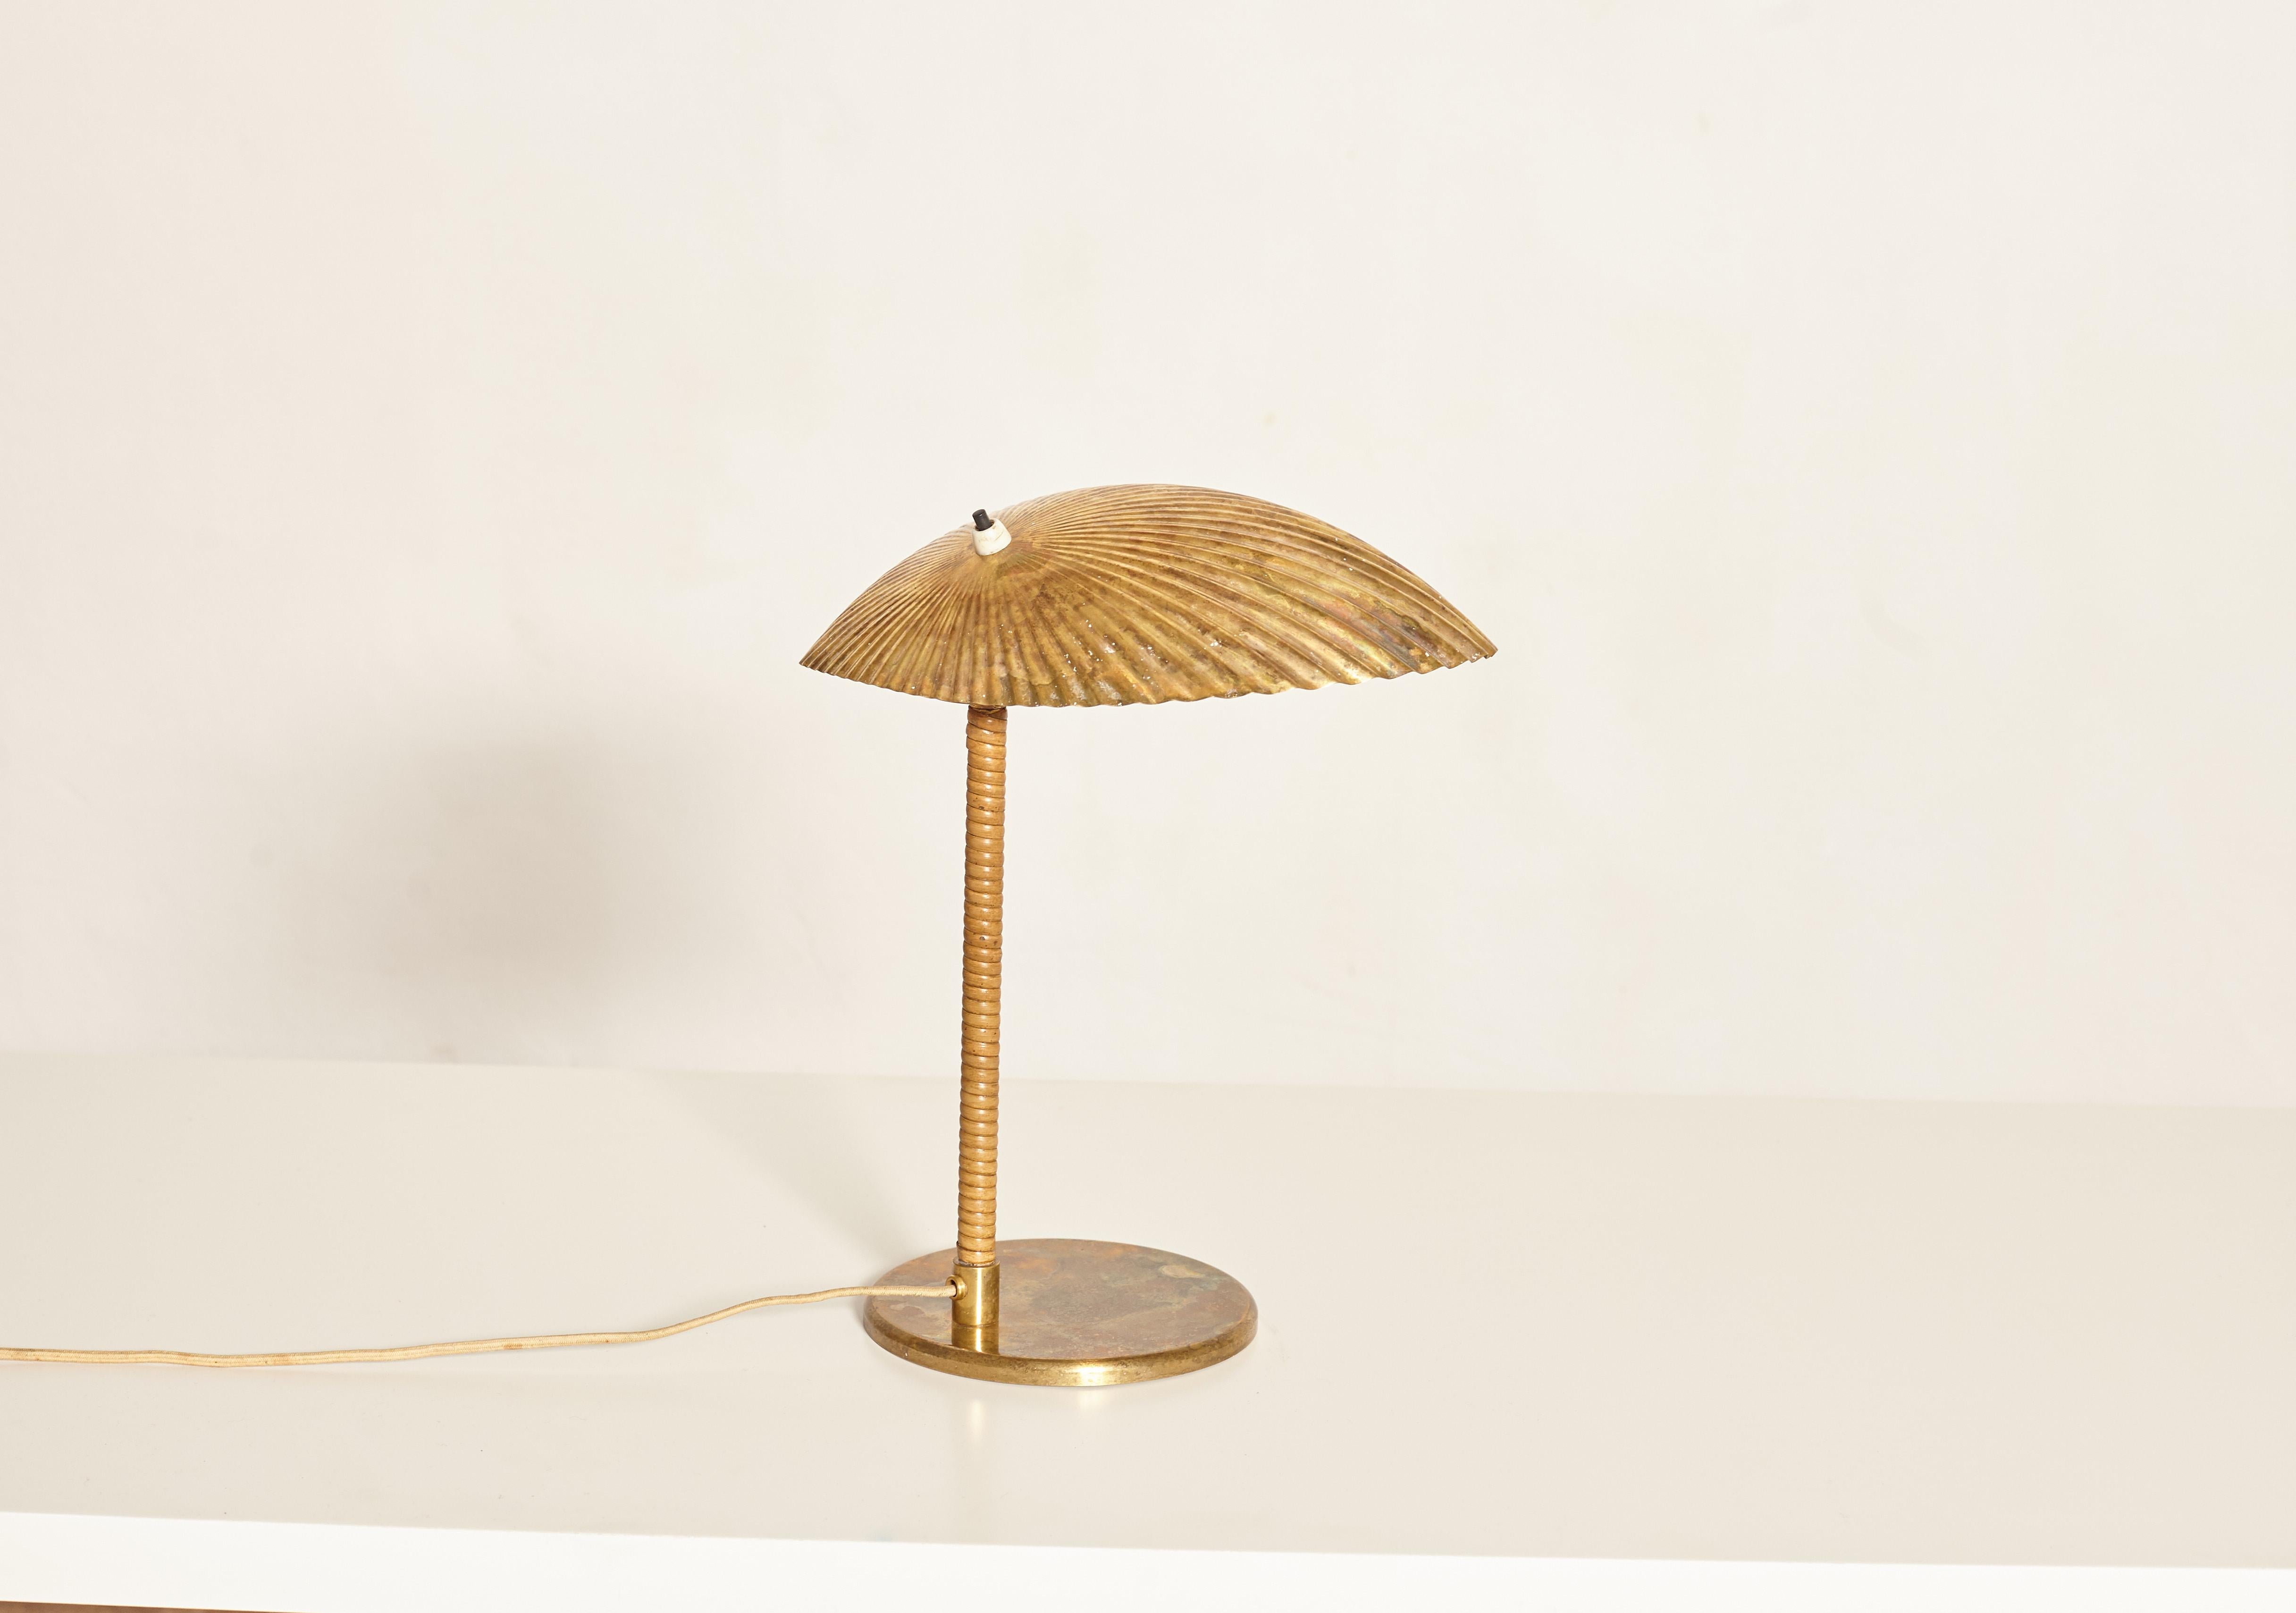 Paavo Tynell Simpukka ‘Clam’ Table / Desk Lamp, Taito Oy, Finland, 1930s-1940s im Zustand „Gut“ in London, GB